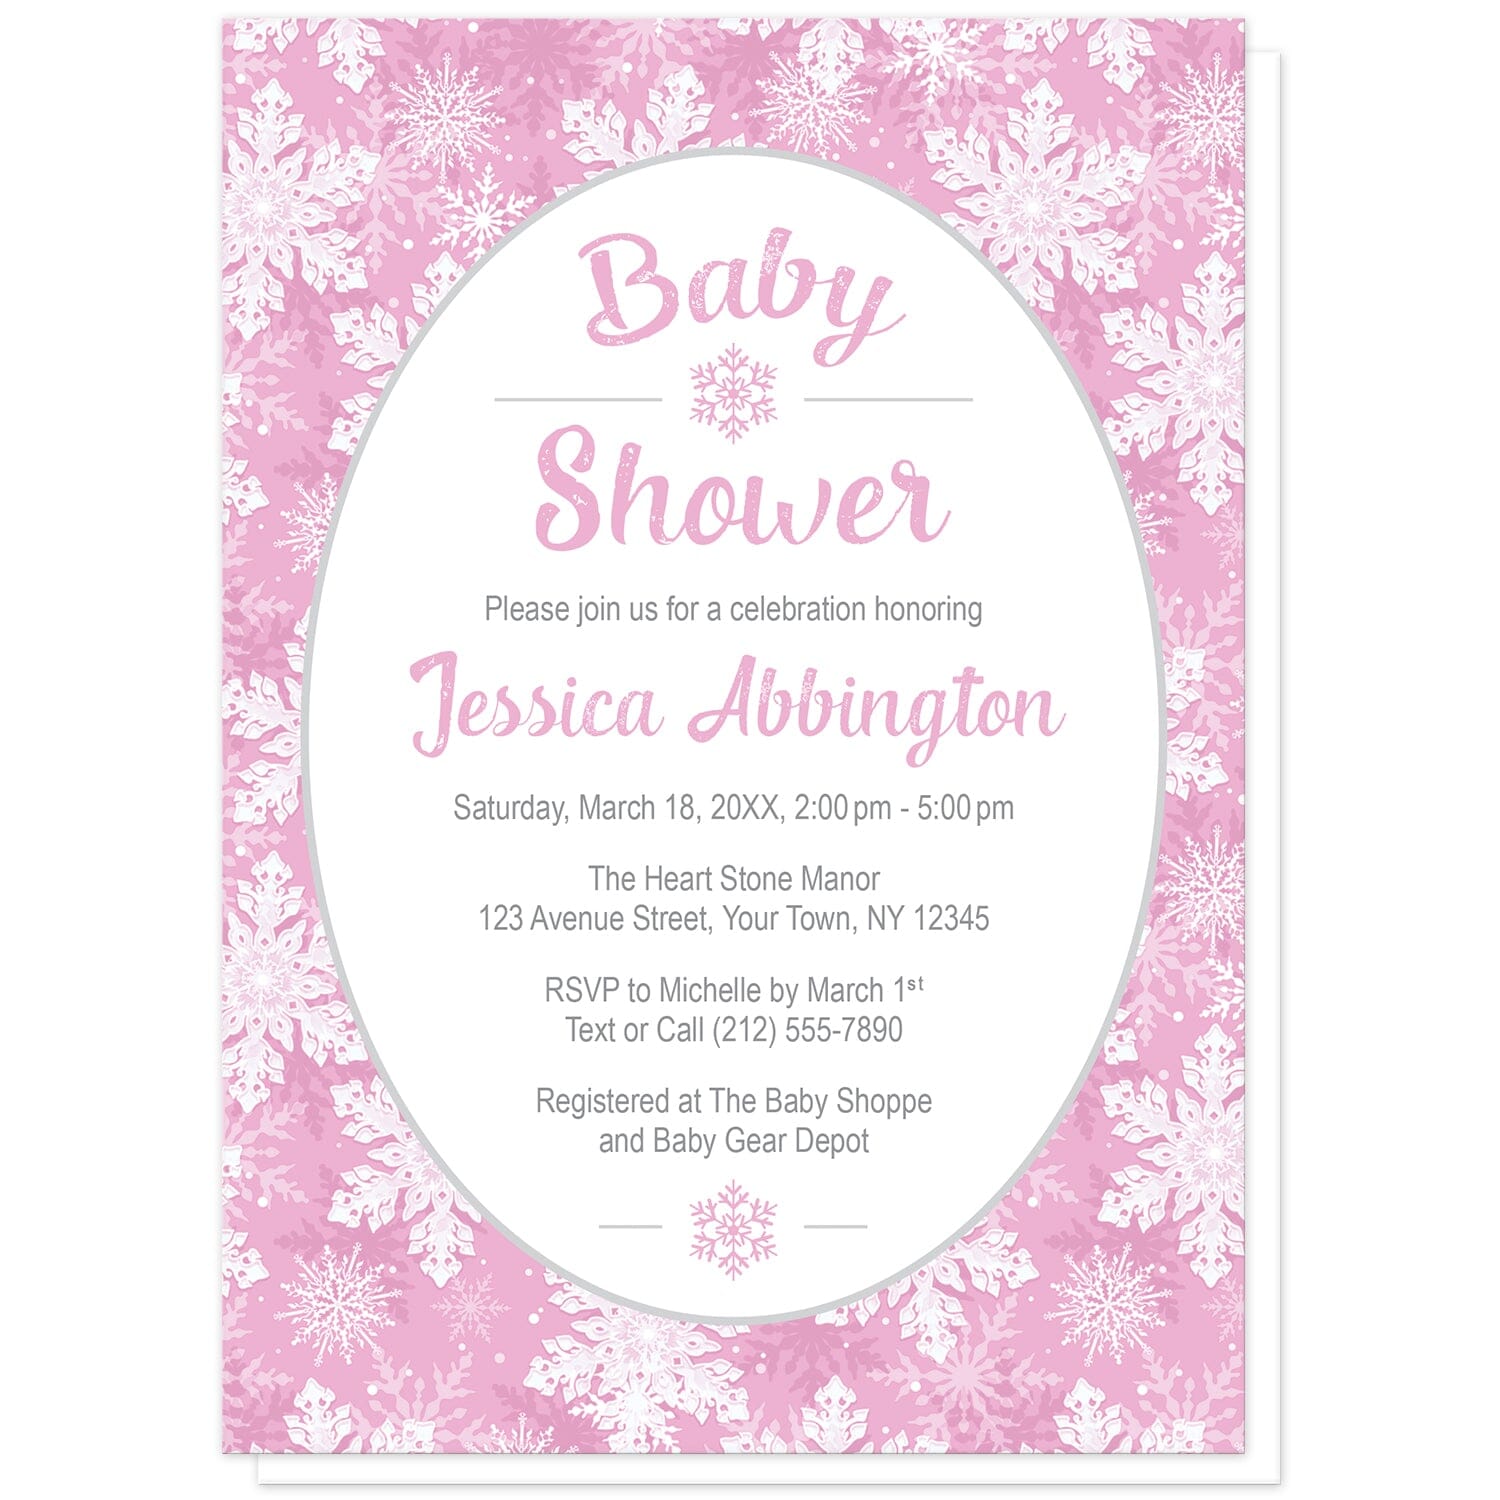 Pink Snowflake Baby Shower Invitations at Artistically Invited. Beautifully ornate pink snowflake baby shower invitations with your personalized baby shower details custom printed in pink and gray in a white oval frame design over a pink and white snowflake pattern background.